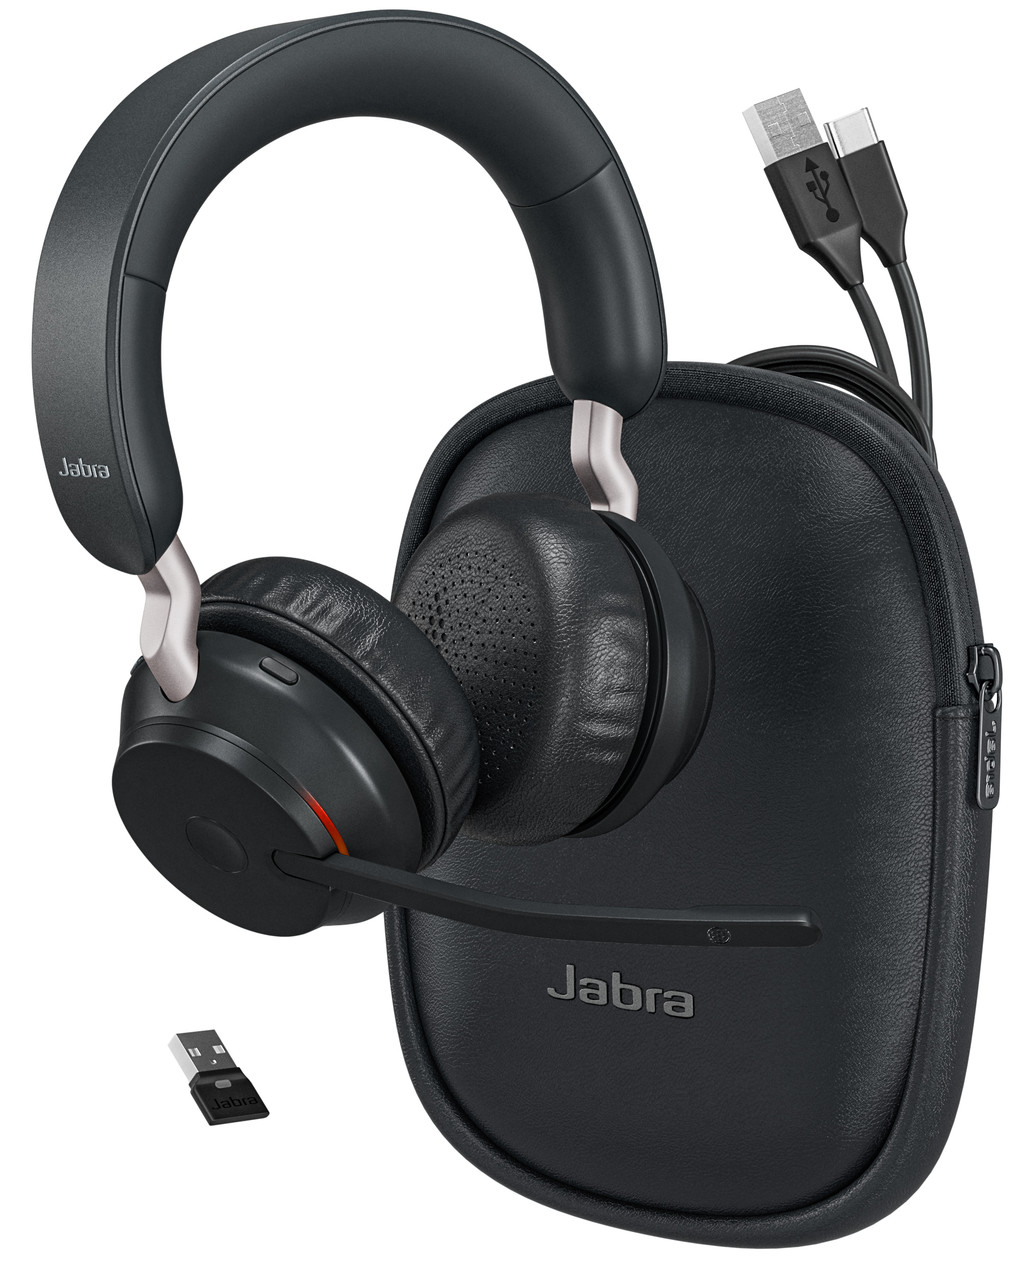 Jabra Evolve2 Stereo Wireless Headset | MS Version | Includes USB Bluetooth Dongle | Compatible with Windows PC, MAC, Smartphone, Streaming Music, Skype, IP Communications | 26599-999-999